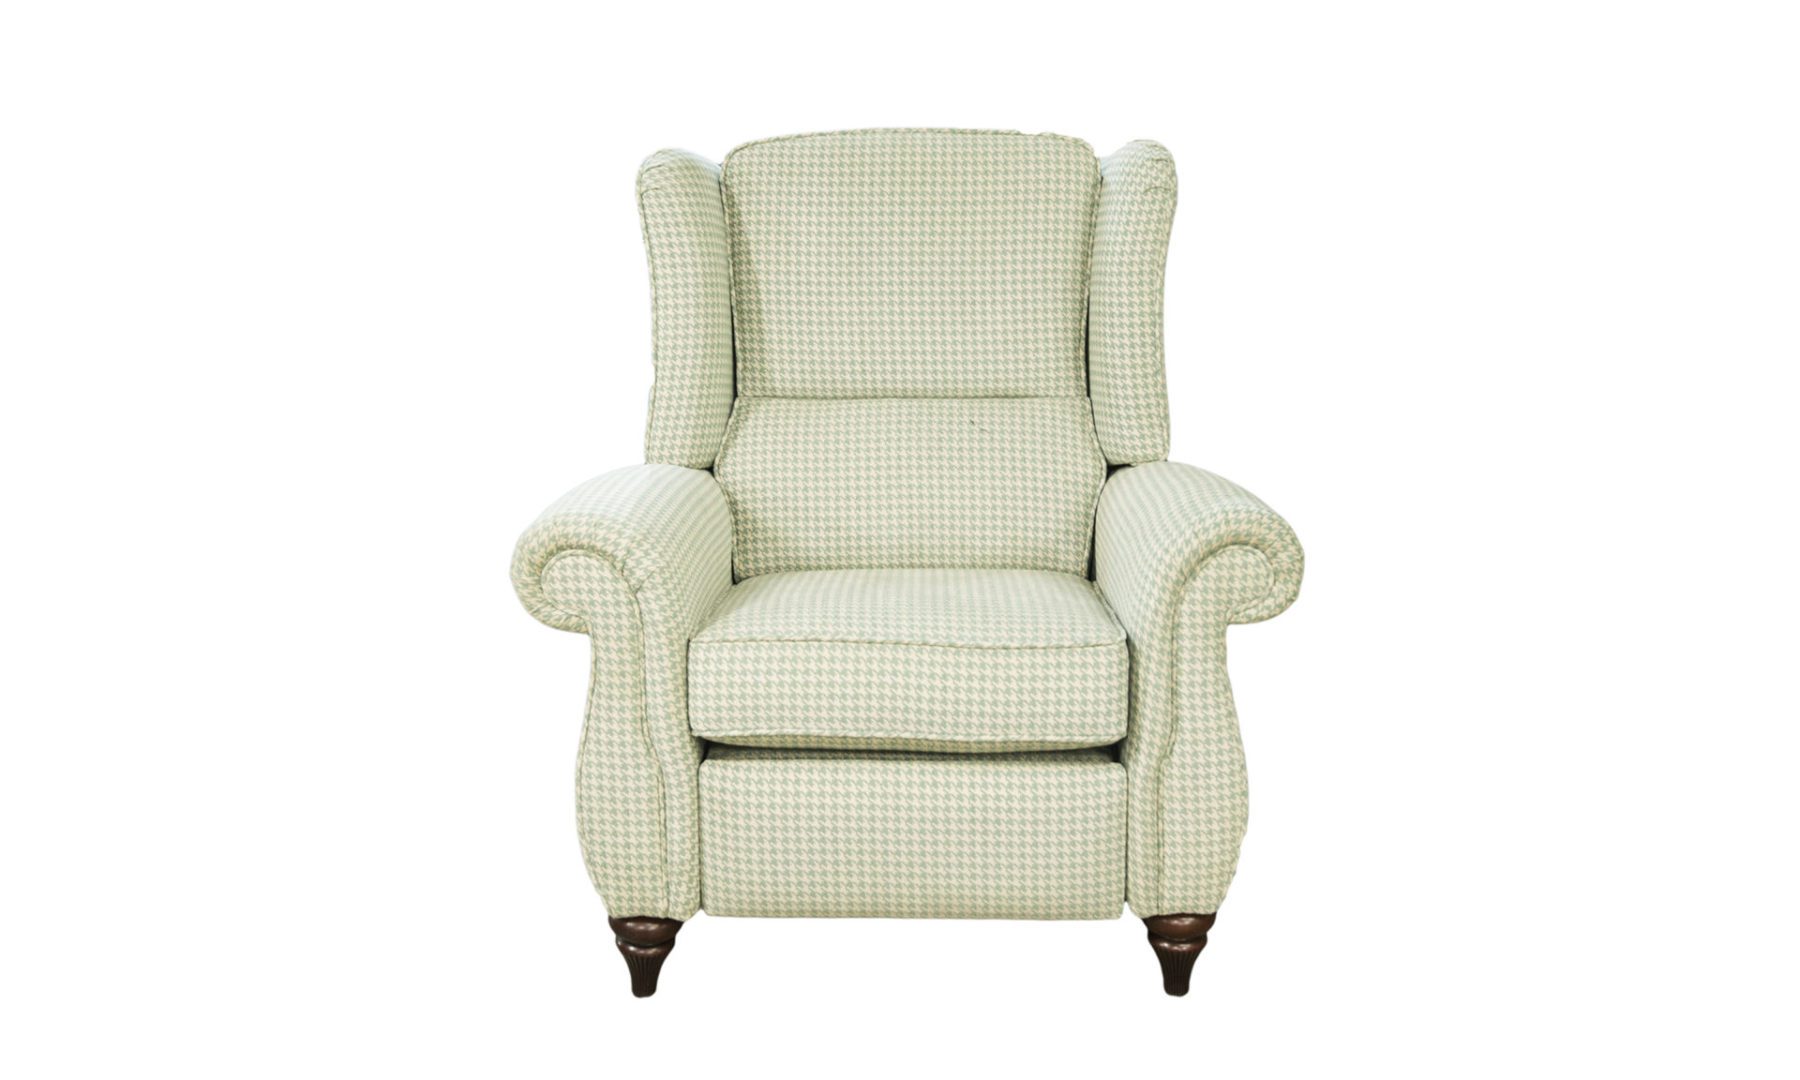 Greville Recliner Chair in Poppy Aqua, Silver Collection of Fabrics